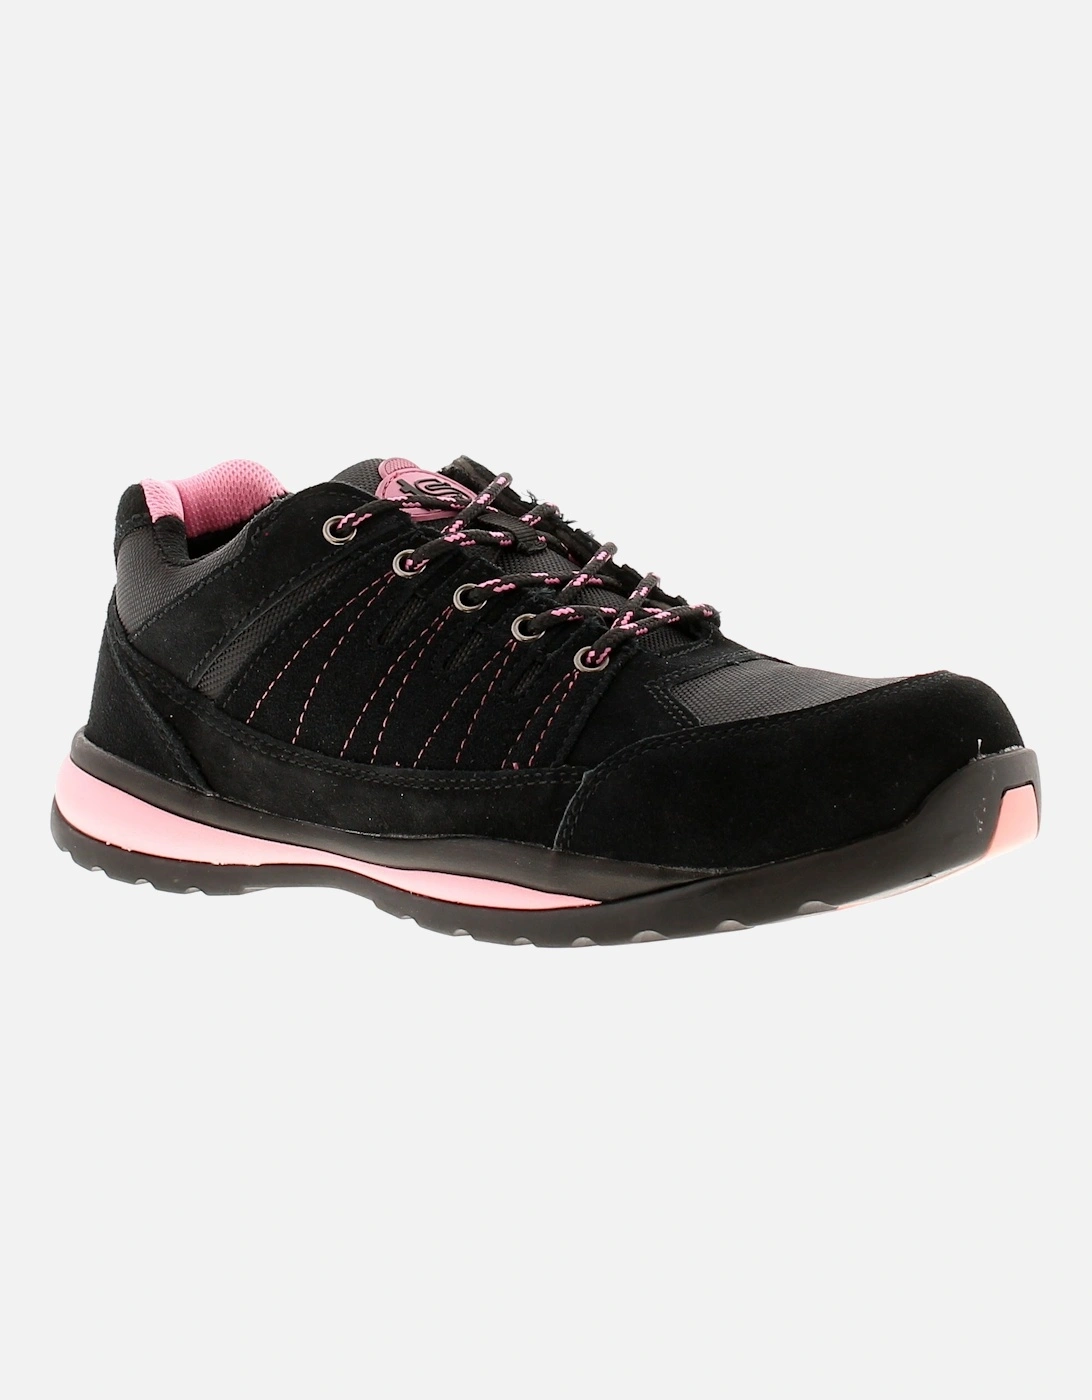 Womens Safety Shoes Trainers Force Suede Leather Lace Up black UK Size, 6 of 5